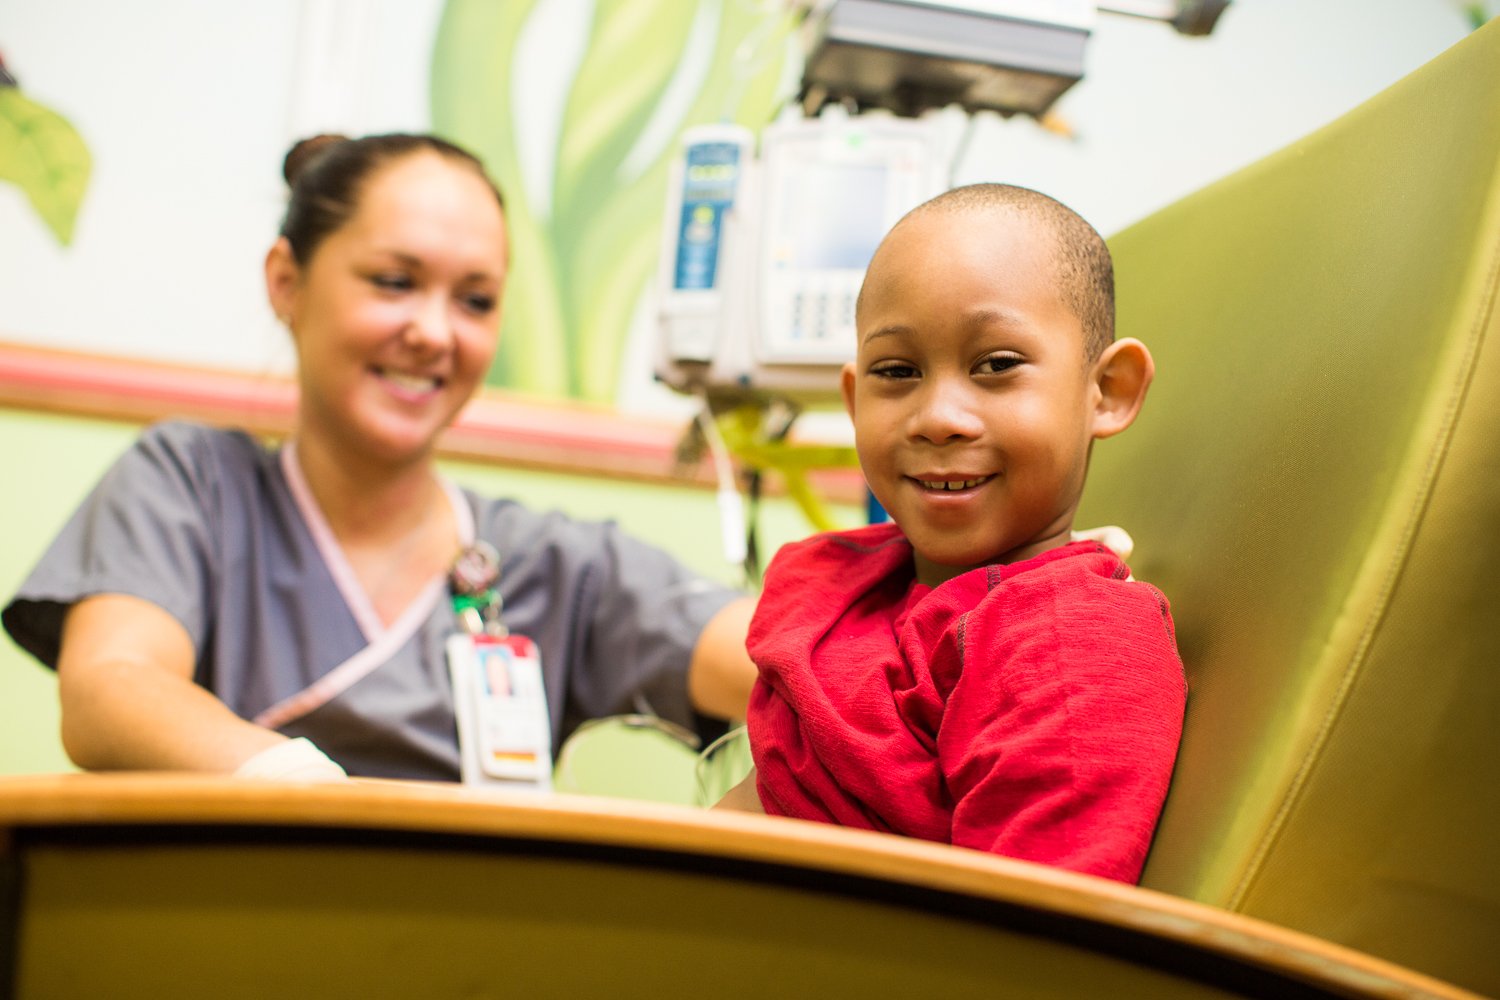 A nurse sitting with a little boy in a red shirt